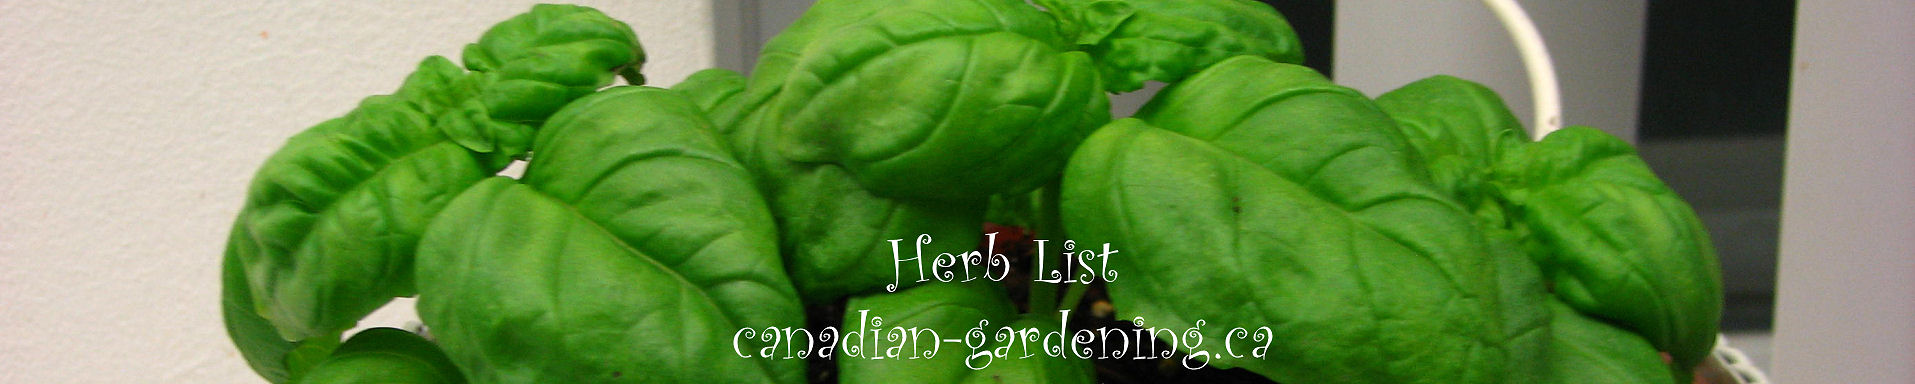  herb list for selecting and growing herbs